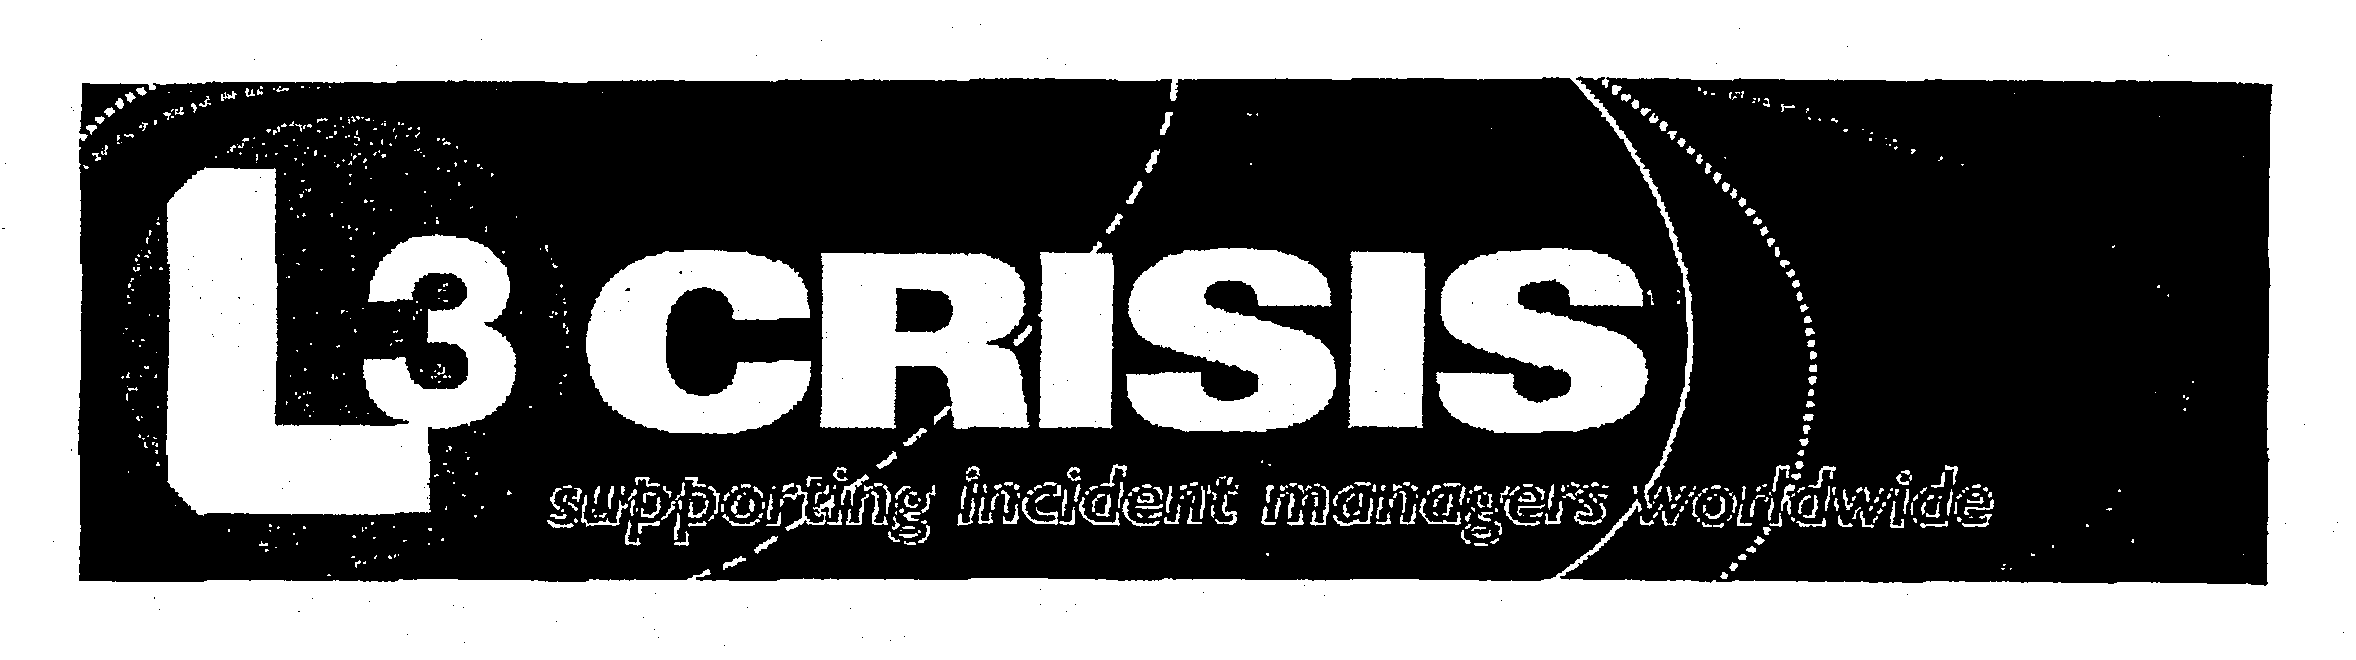 Trademark Logo L3 CRISIS SUPPORTING INCIDENT MANAGERS WORLDWIDE